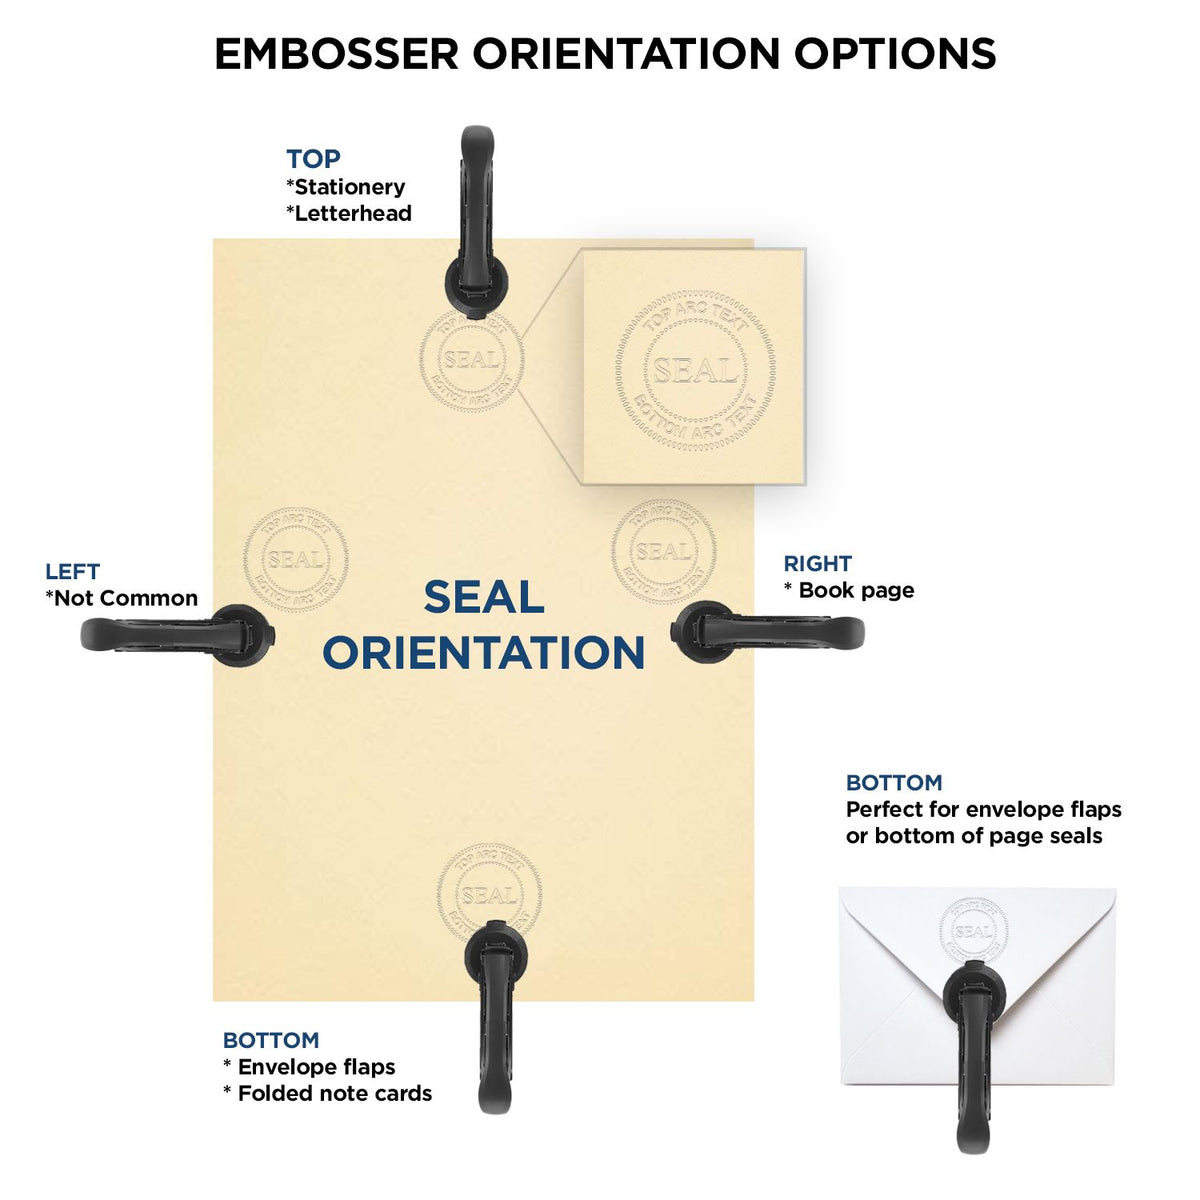 An infographic for the Heavy Duty Cast Iron North Carolina Geologist Seal Embosser showing embosser orientation, this is showing examples of a top, bottom, right and left insert.